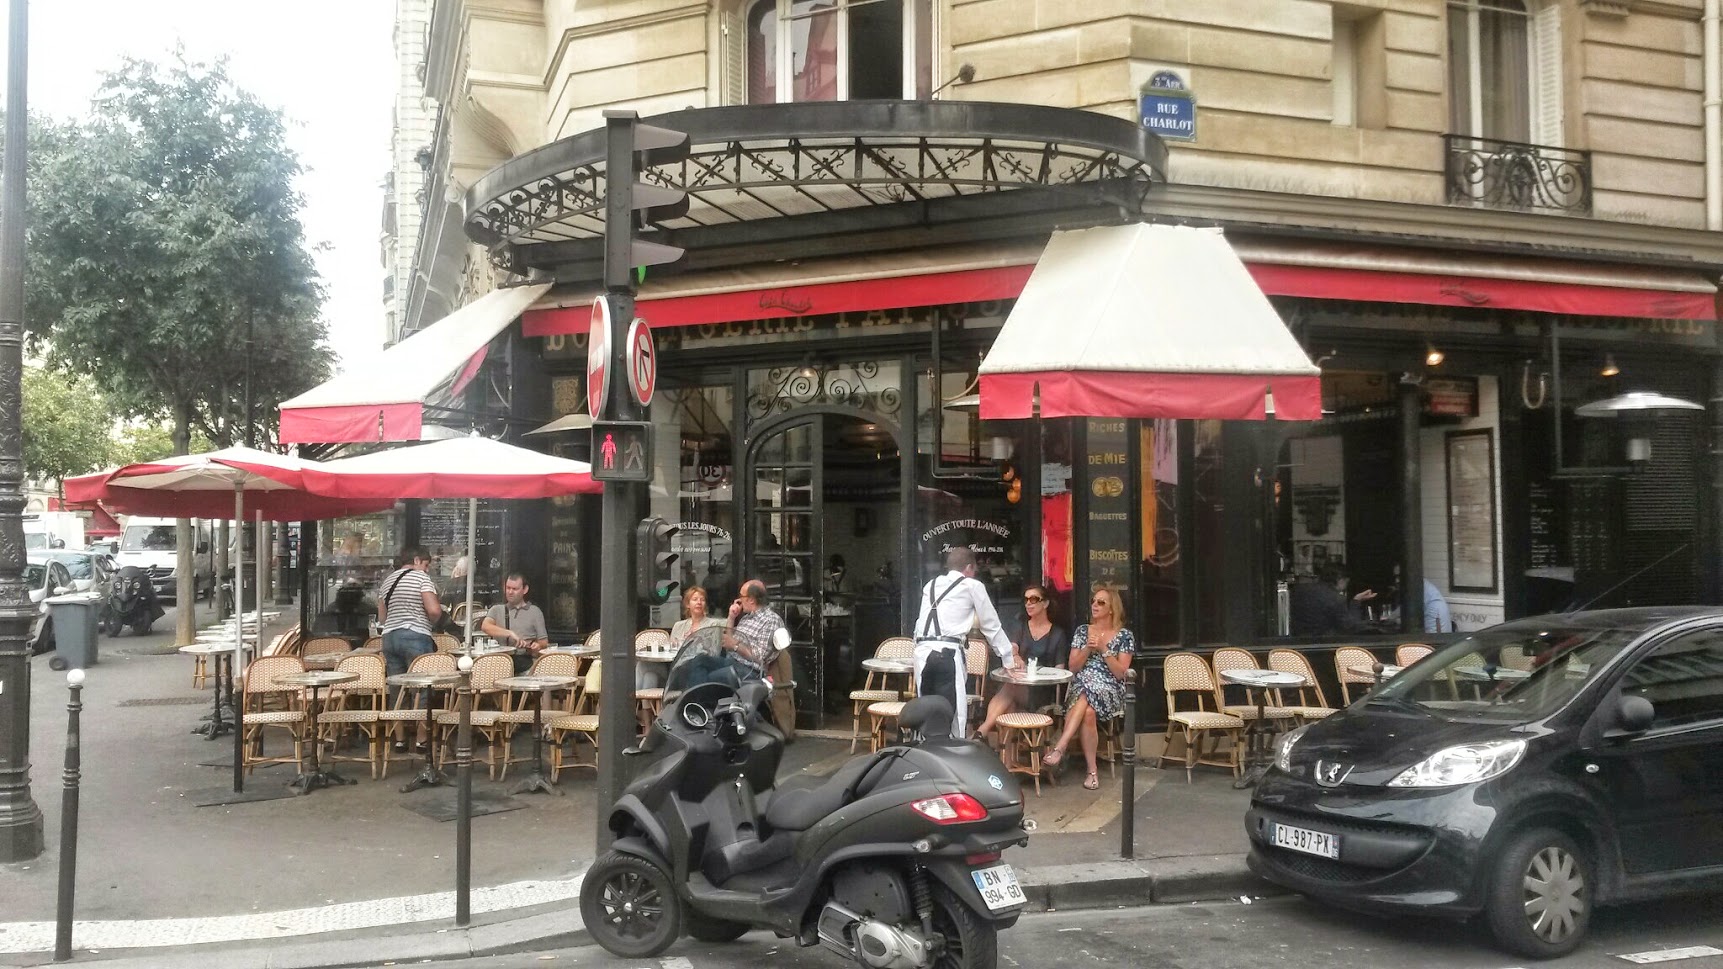 Paris to shut cafes and bars to curb Covid-19 spread as infections rise